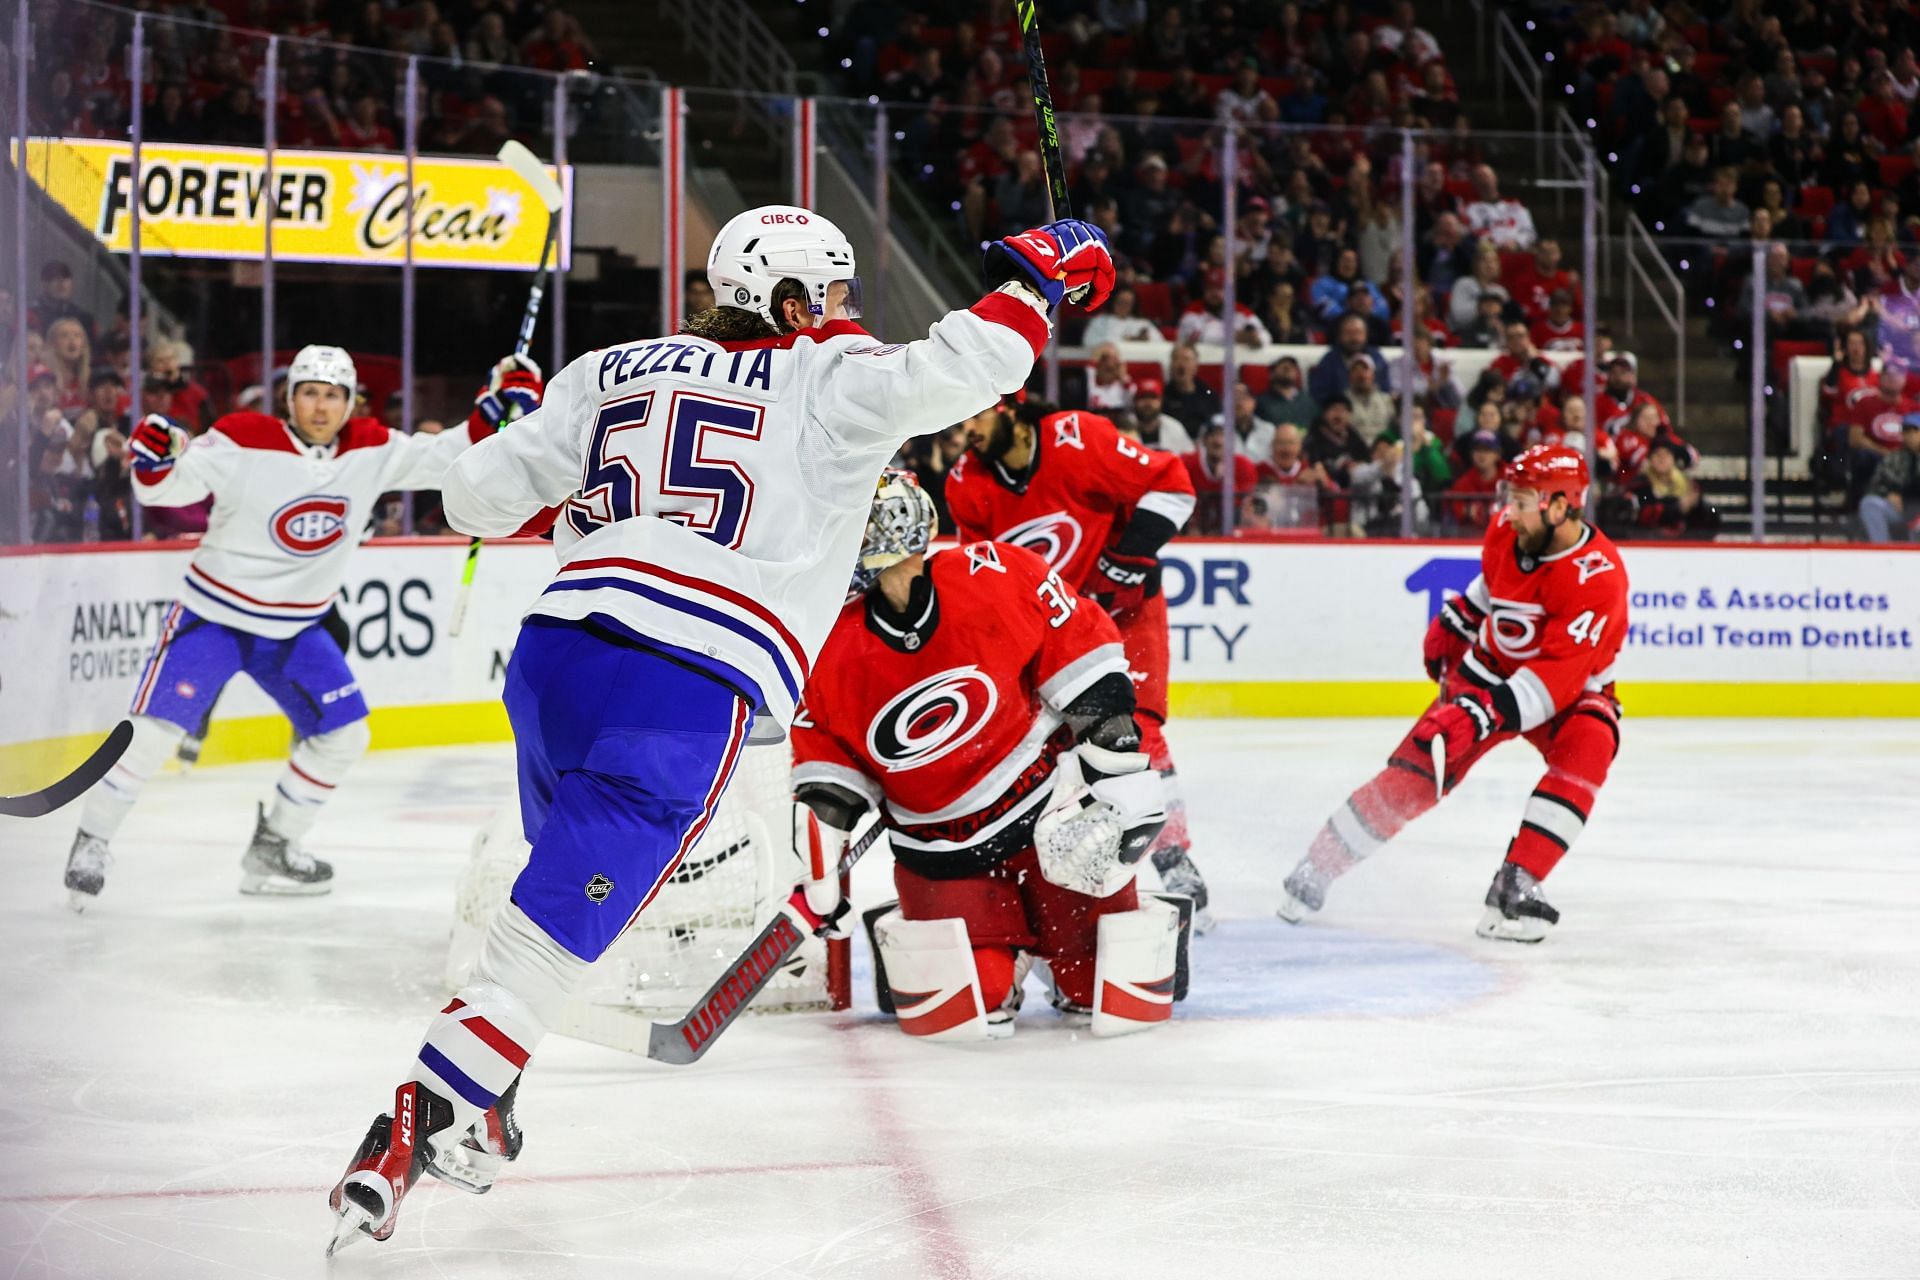 Montreal Canadiens Vs Carolina Hurricanes Game Preview Predictions Odds Betting Tips And More 